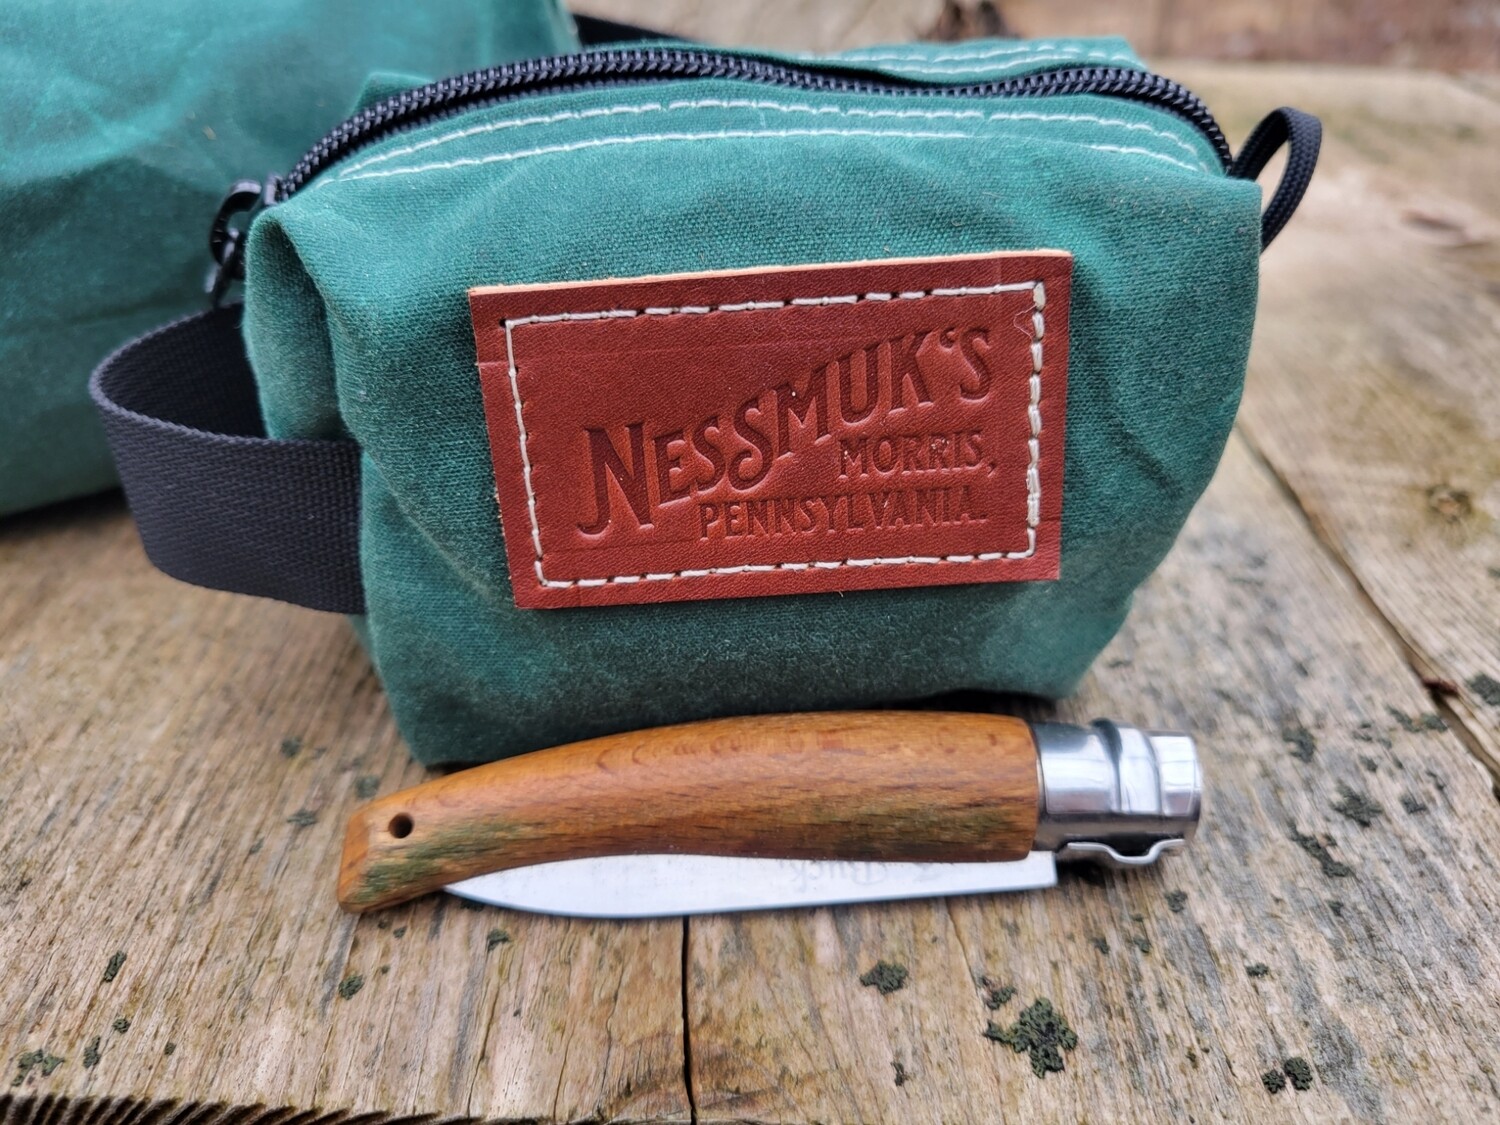 Nessmuk's Mini Pack Pouch